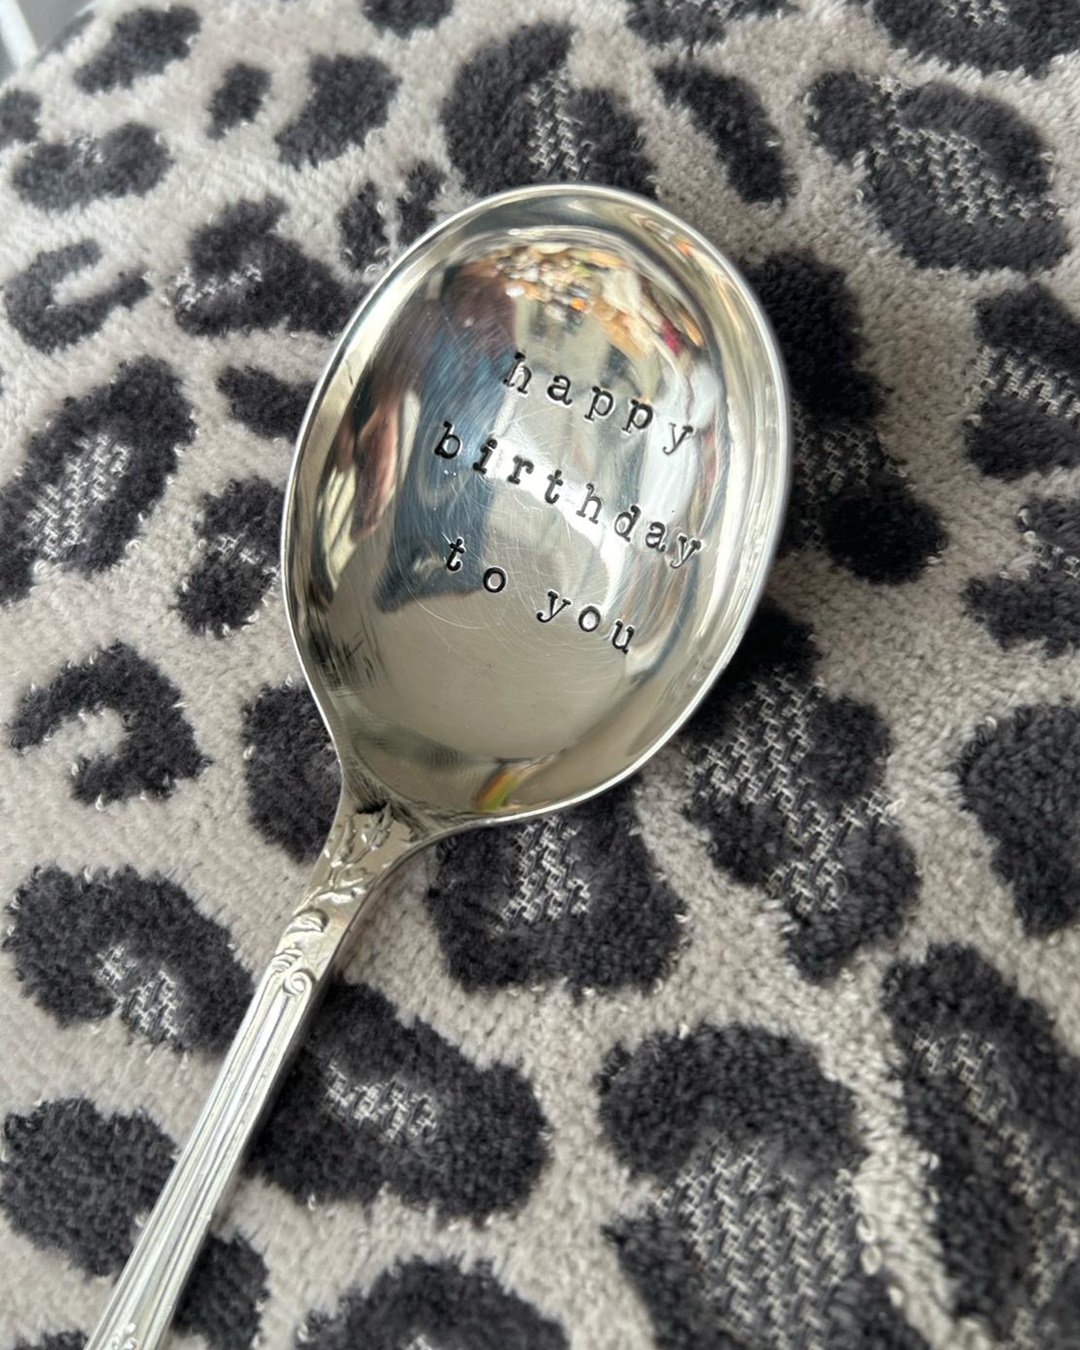 Silver spoon with happy birthday to you stamped